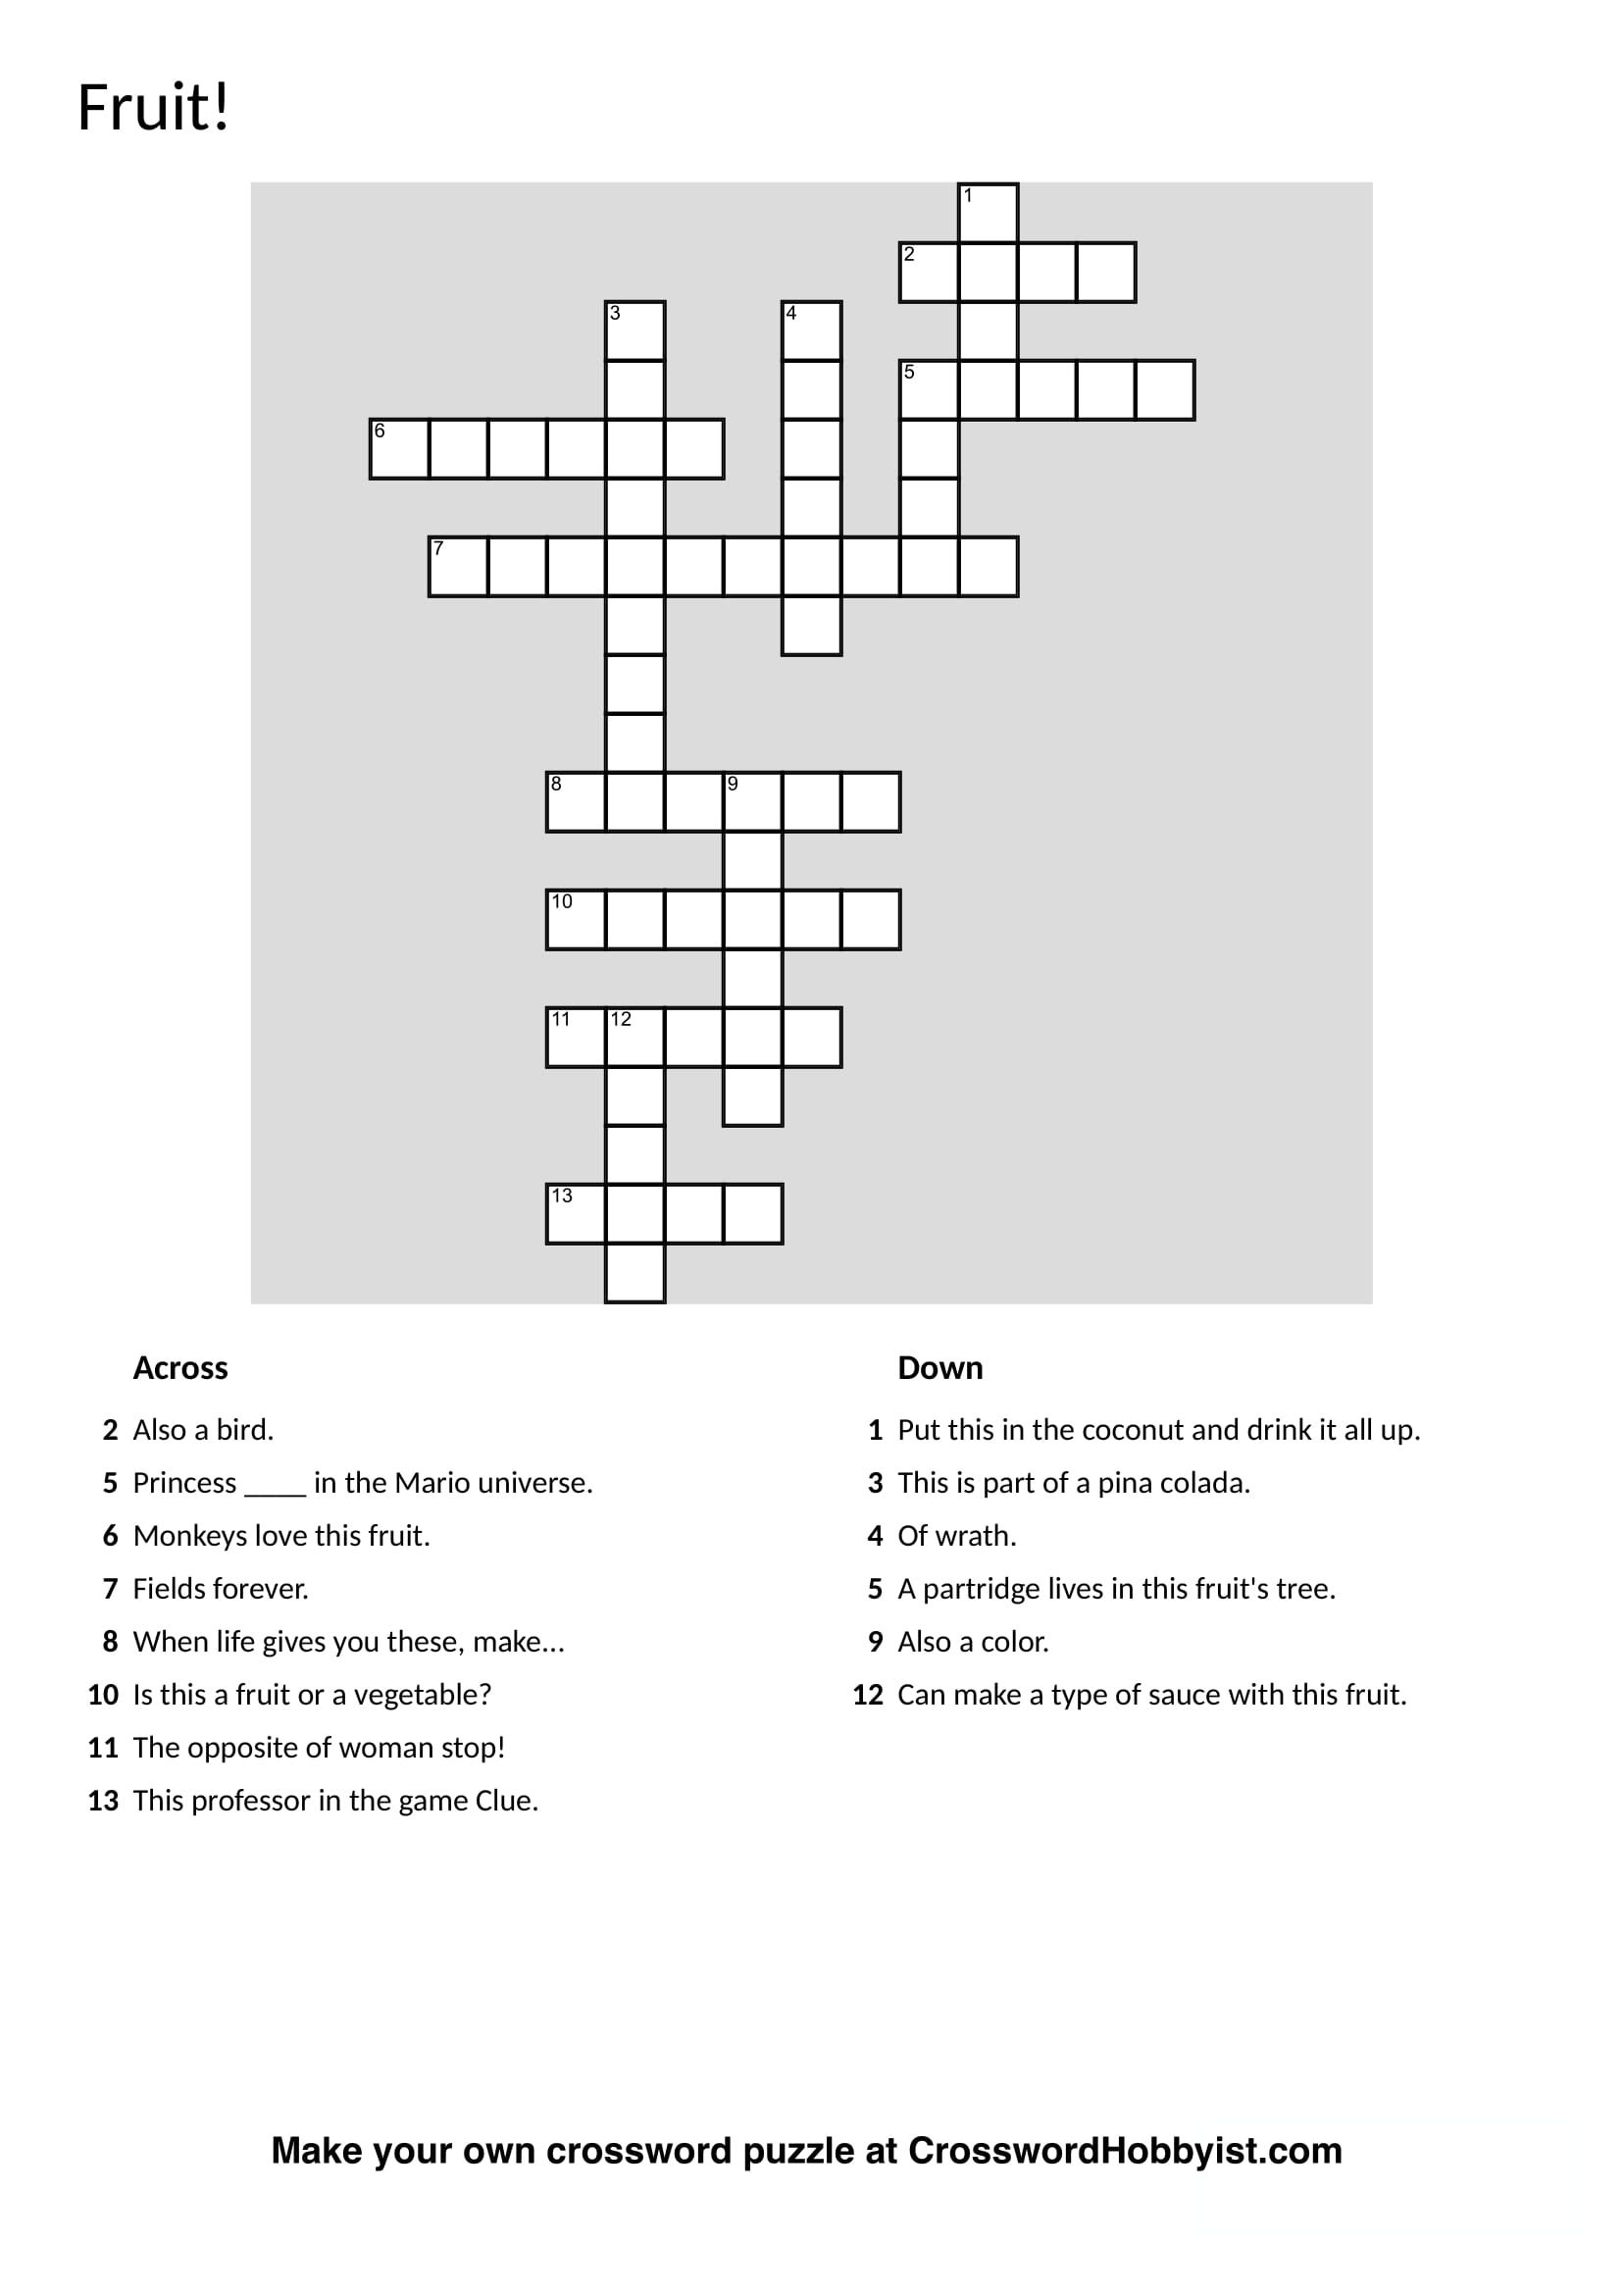 Make Your Own Fun Crossword Puzzles With Crosswordhobbyist - Printable Crossword Puzzles Make Your Own